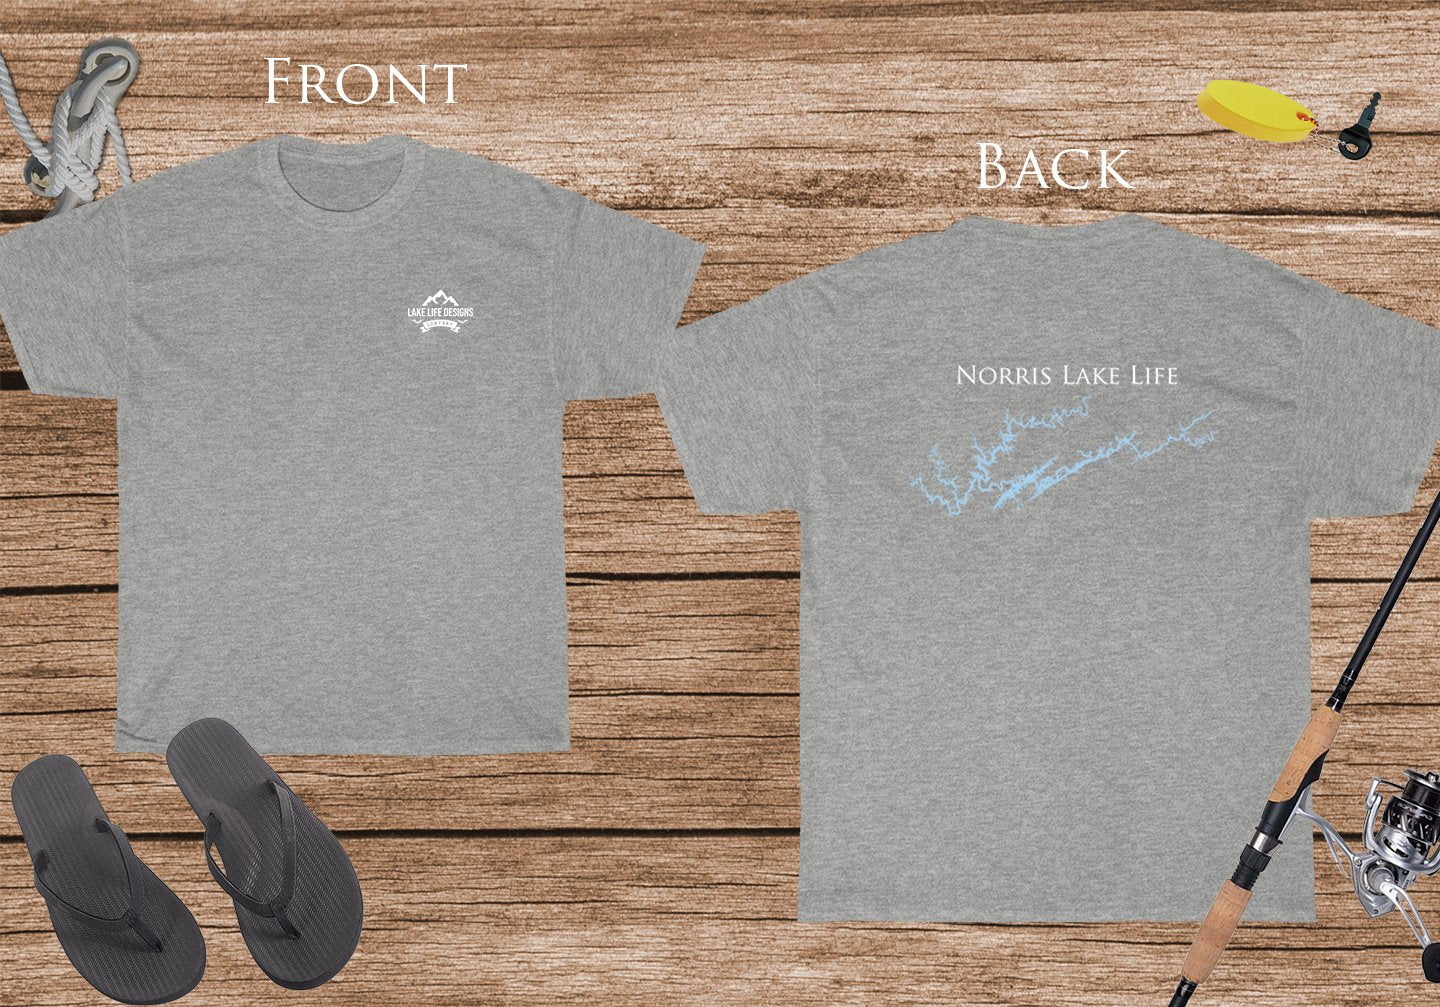 Norris Lake Life - Cotton Short Sleeved - FRONT & BACK PRINTED - Short Sleeved Cotton Tee - Tennessee Lake